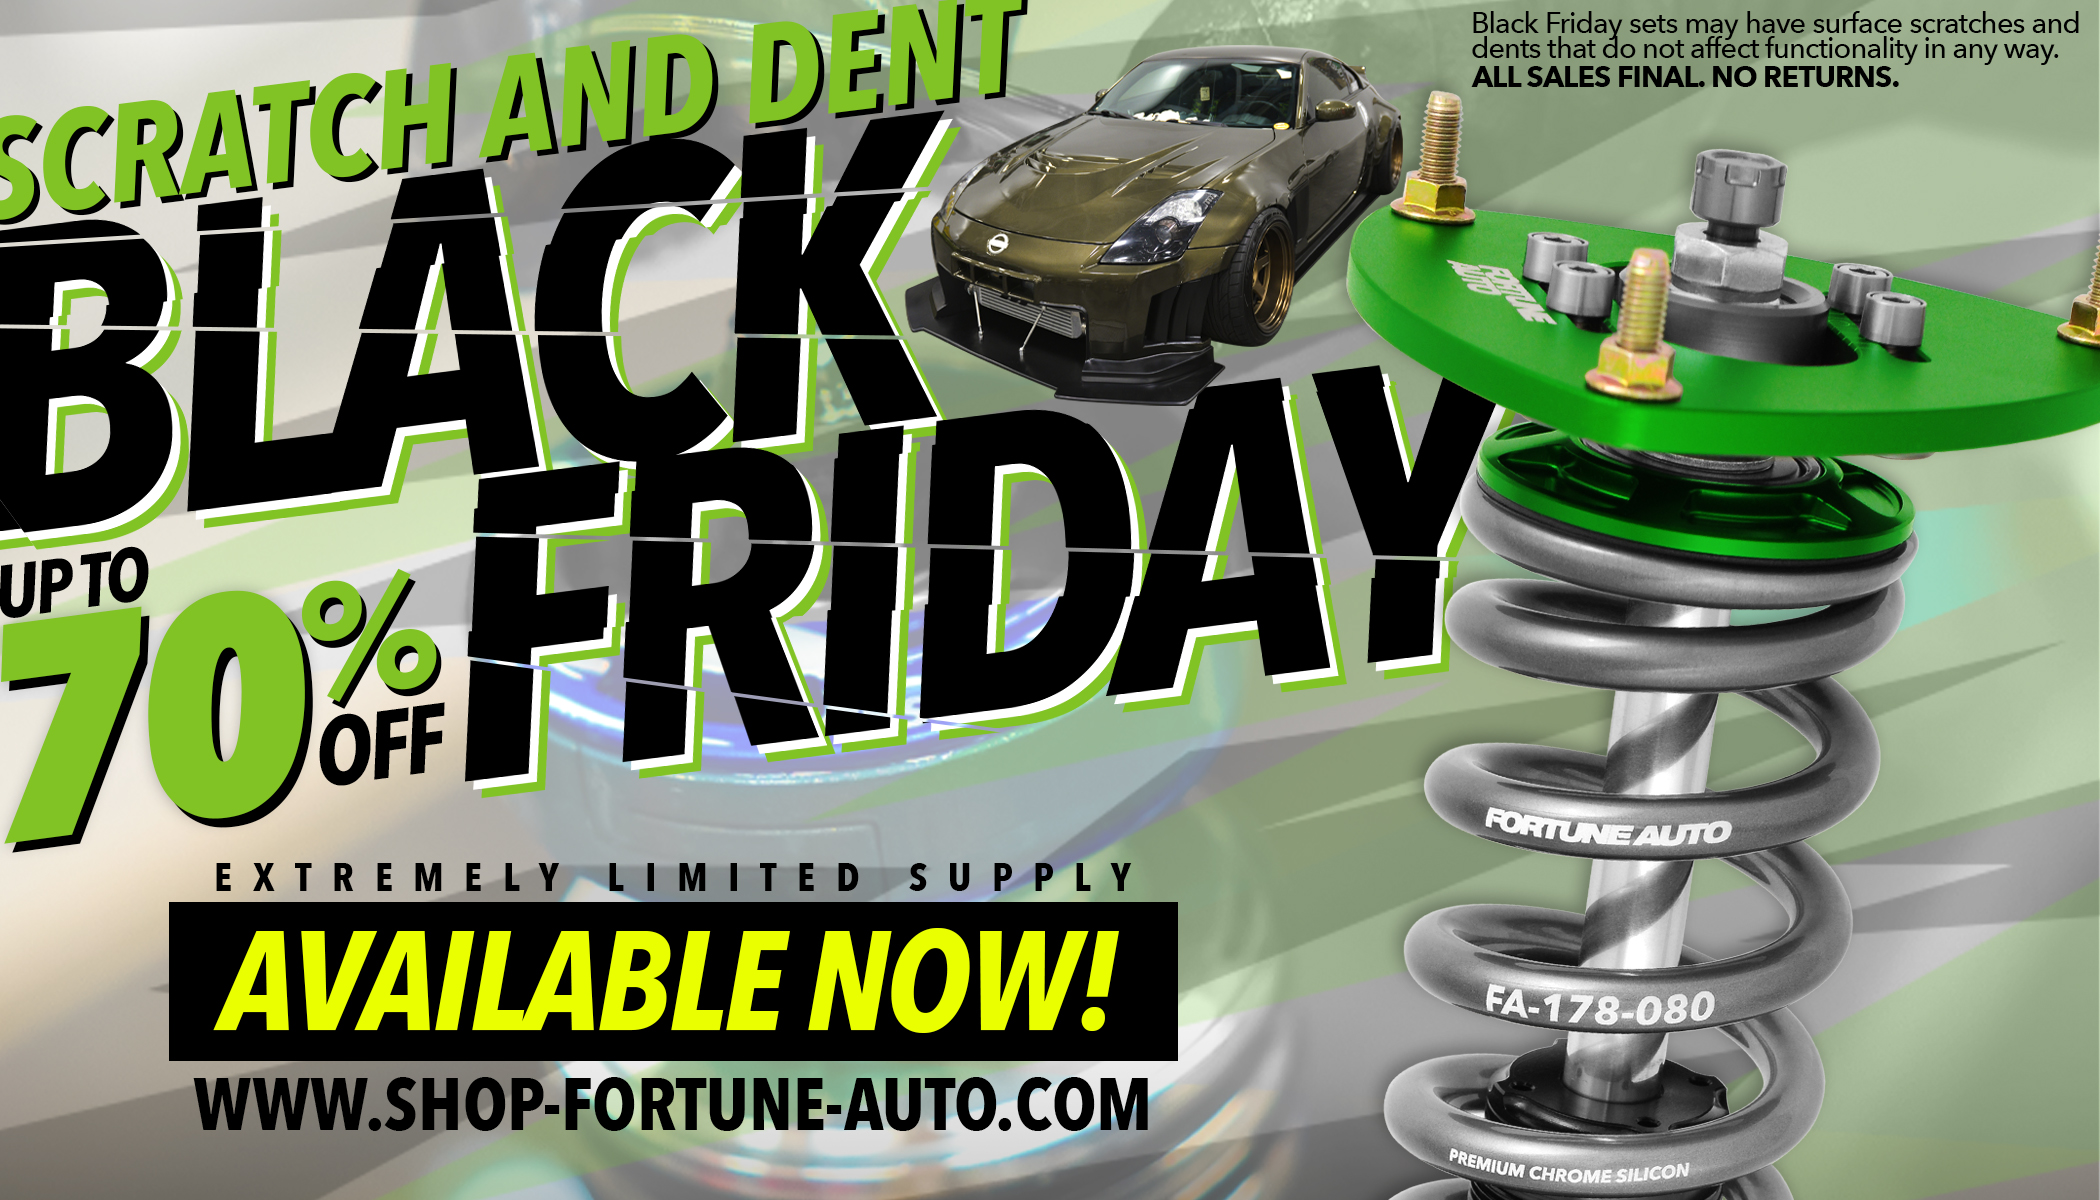 Fortune Auto Black Friday Scratch and Dent deals sale 2021